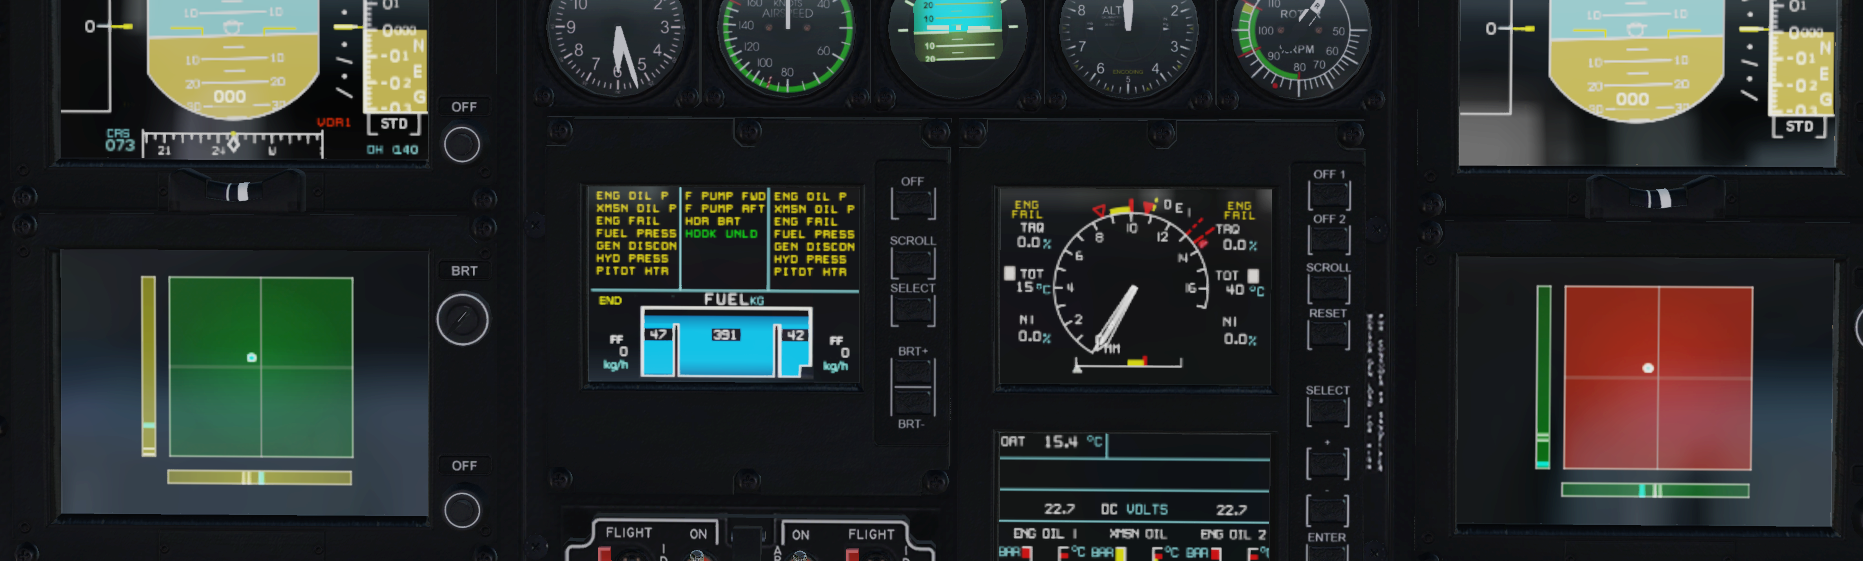 Example of double control gauges. Co-pilot is in control at stick, pedals and collective are ready for take over by co-pilot.